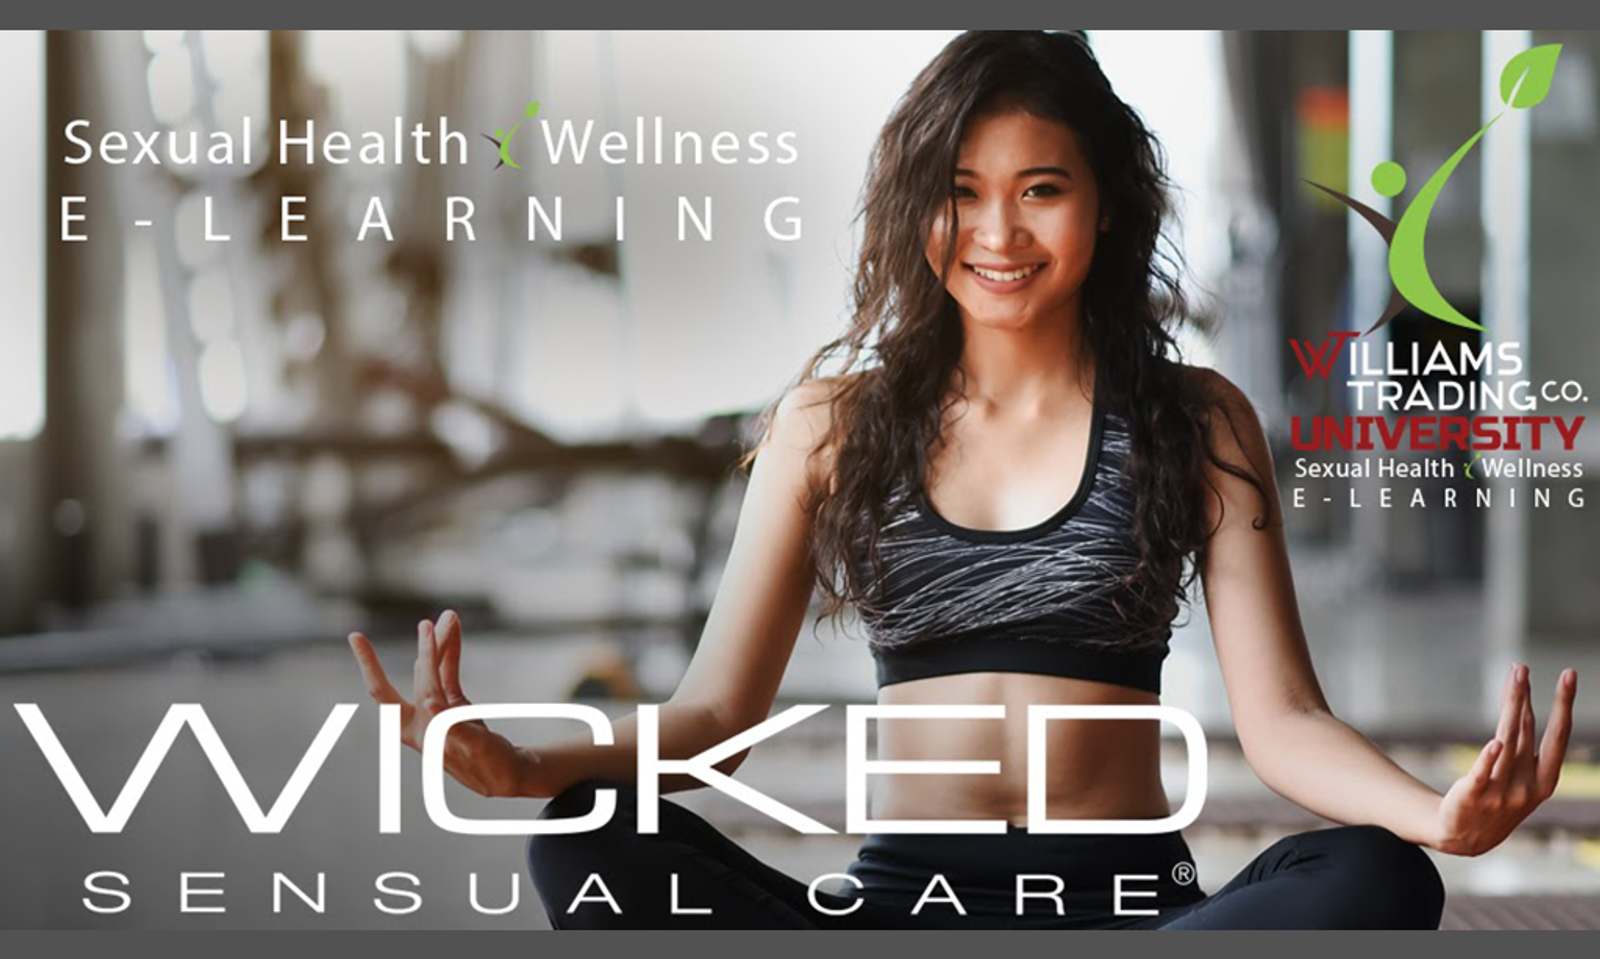 Williams Trading Univ. Offers Wicked Sensual Care Course